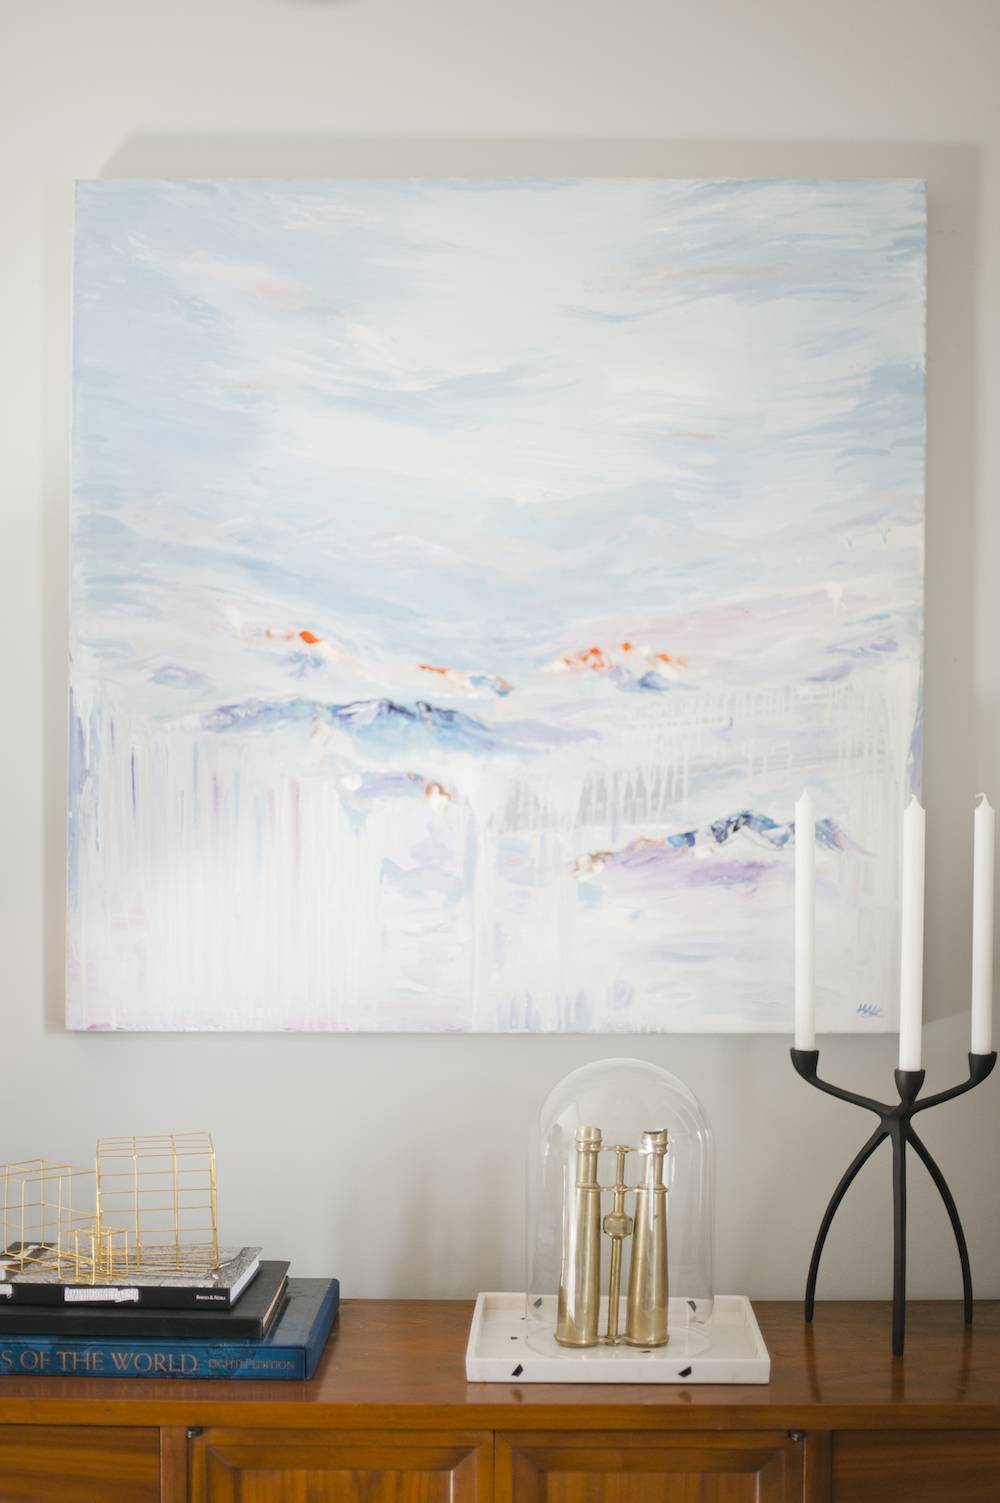 A painting hangs behind candles on a table.